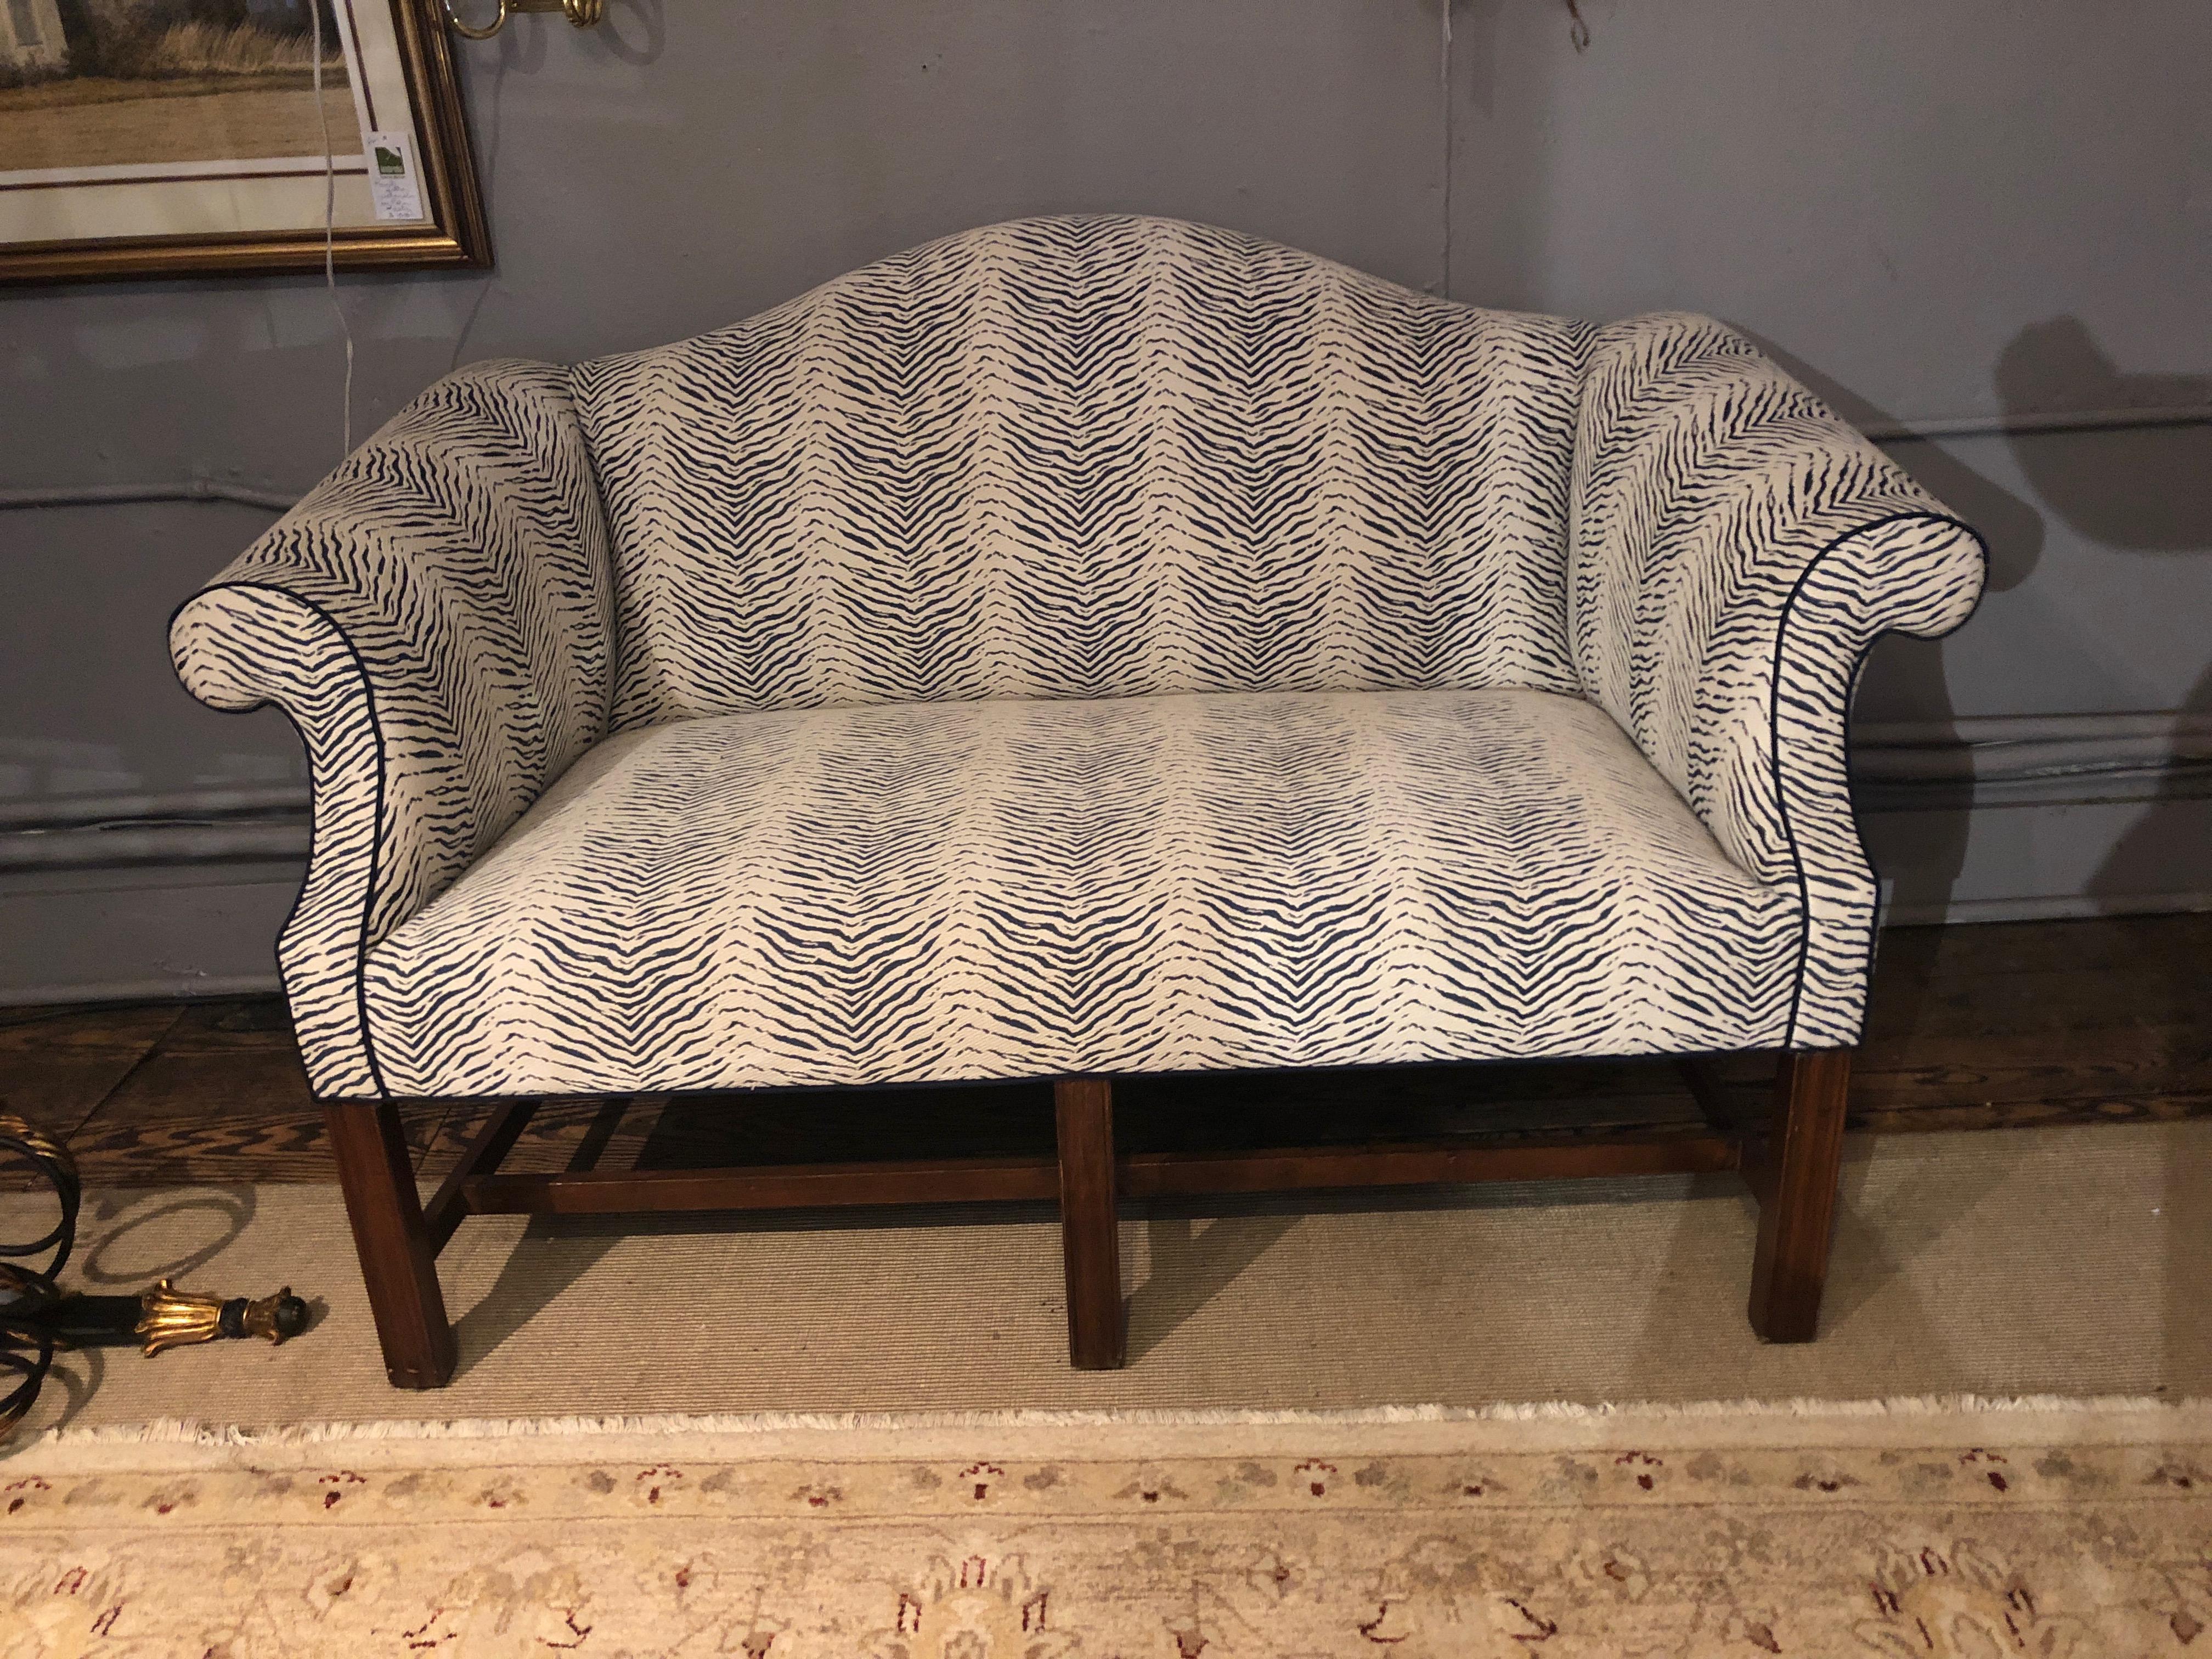 Well made, heavy and comfy loveseat having turned arms and camelback shape, with handsome mahogany legs. Upholstery is a dark blue and white faux animal print.
Measures: Seat height 18
Arm height 28.5.